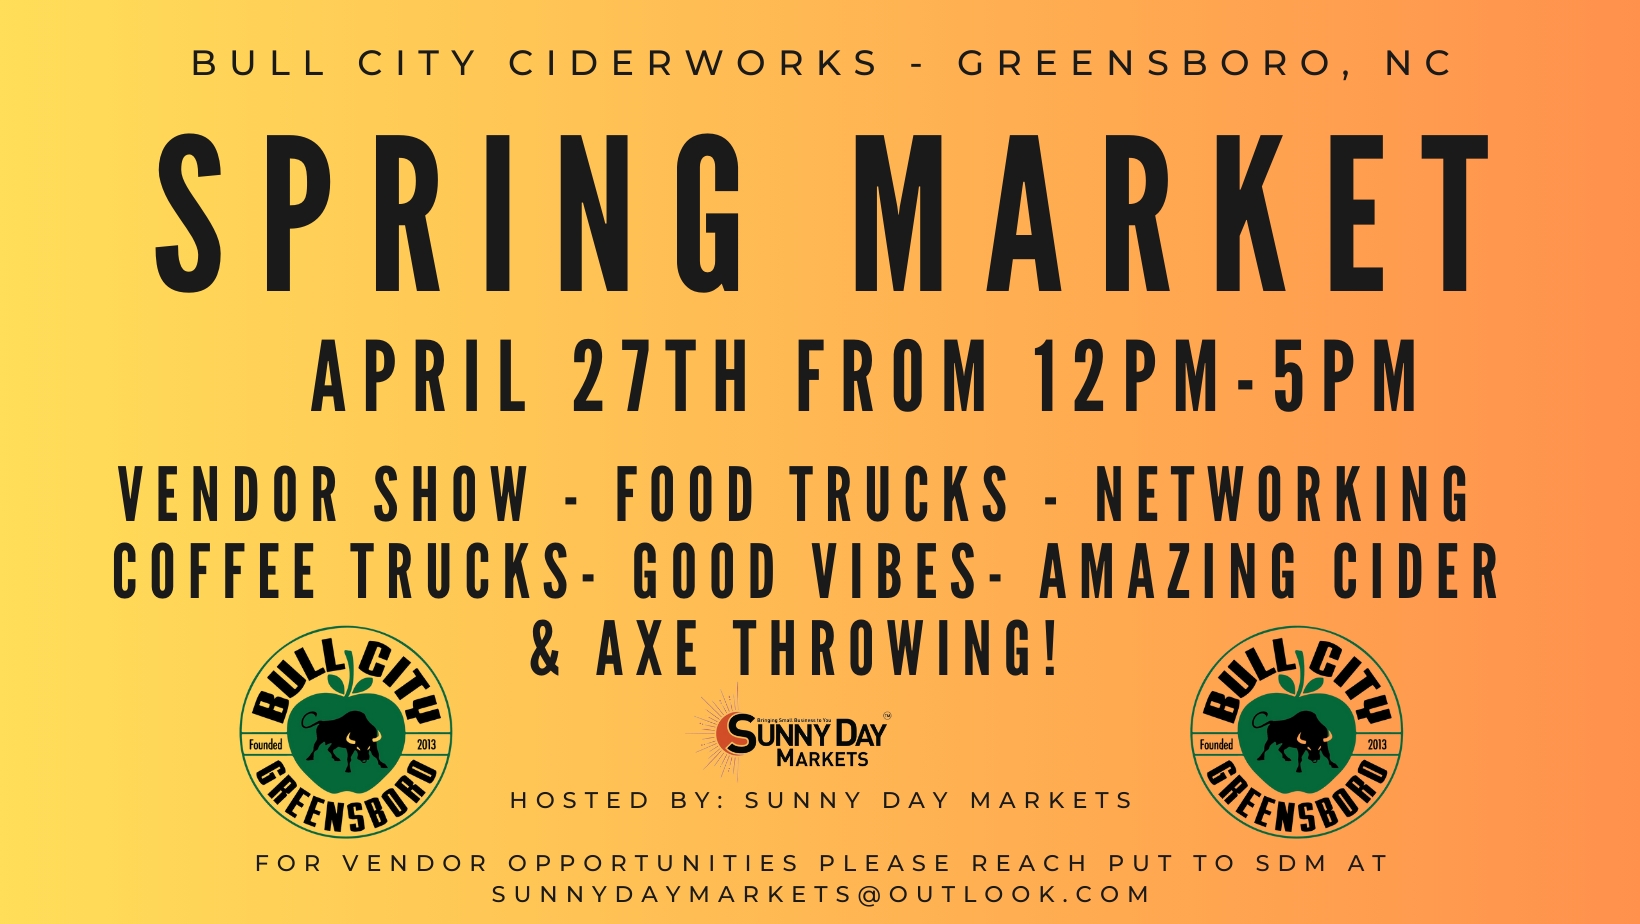 Bull City Cider Works Pop-Up Market - Greensboro cover image